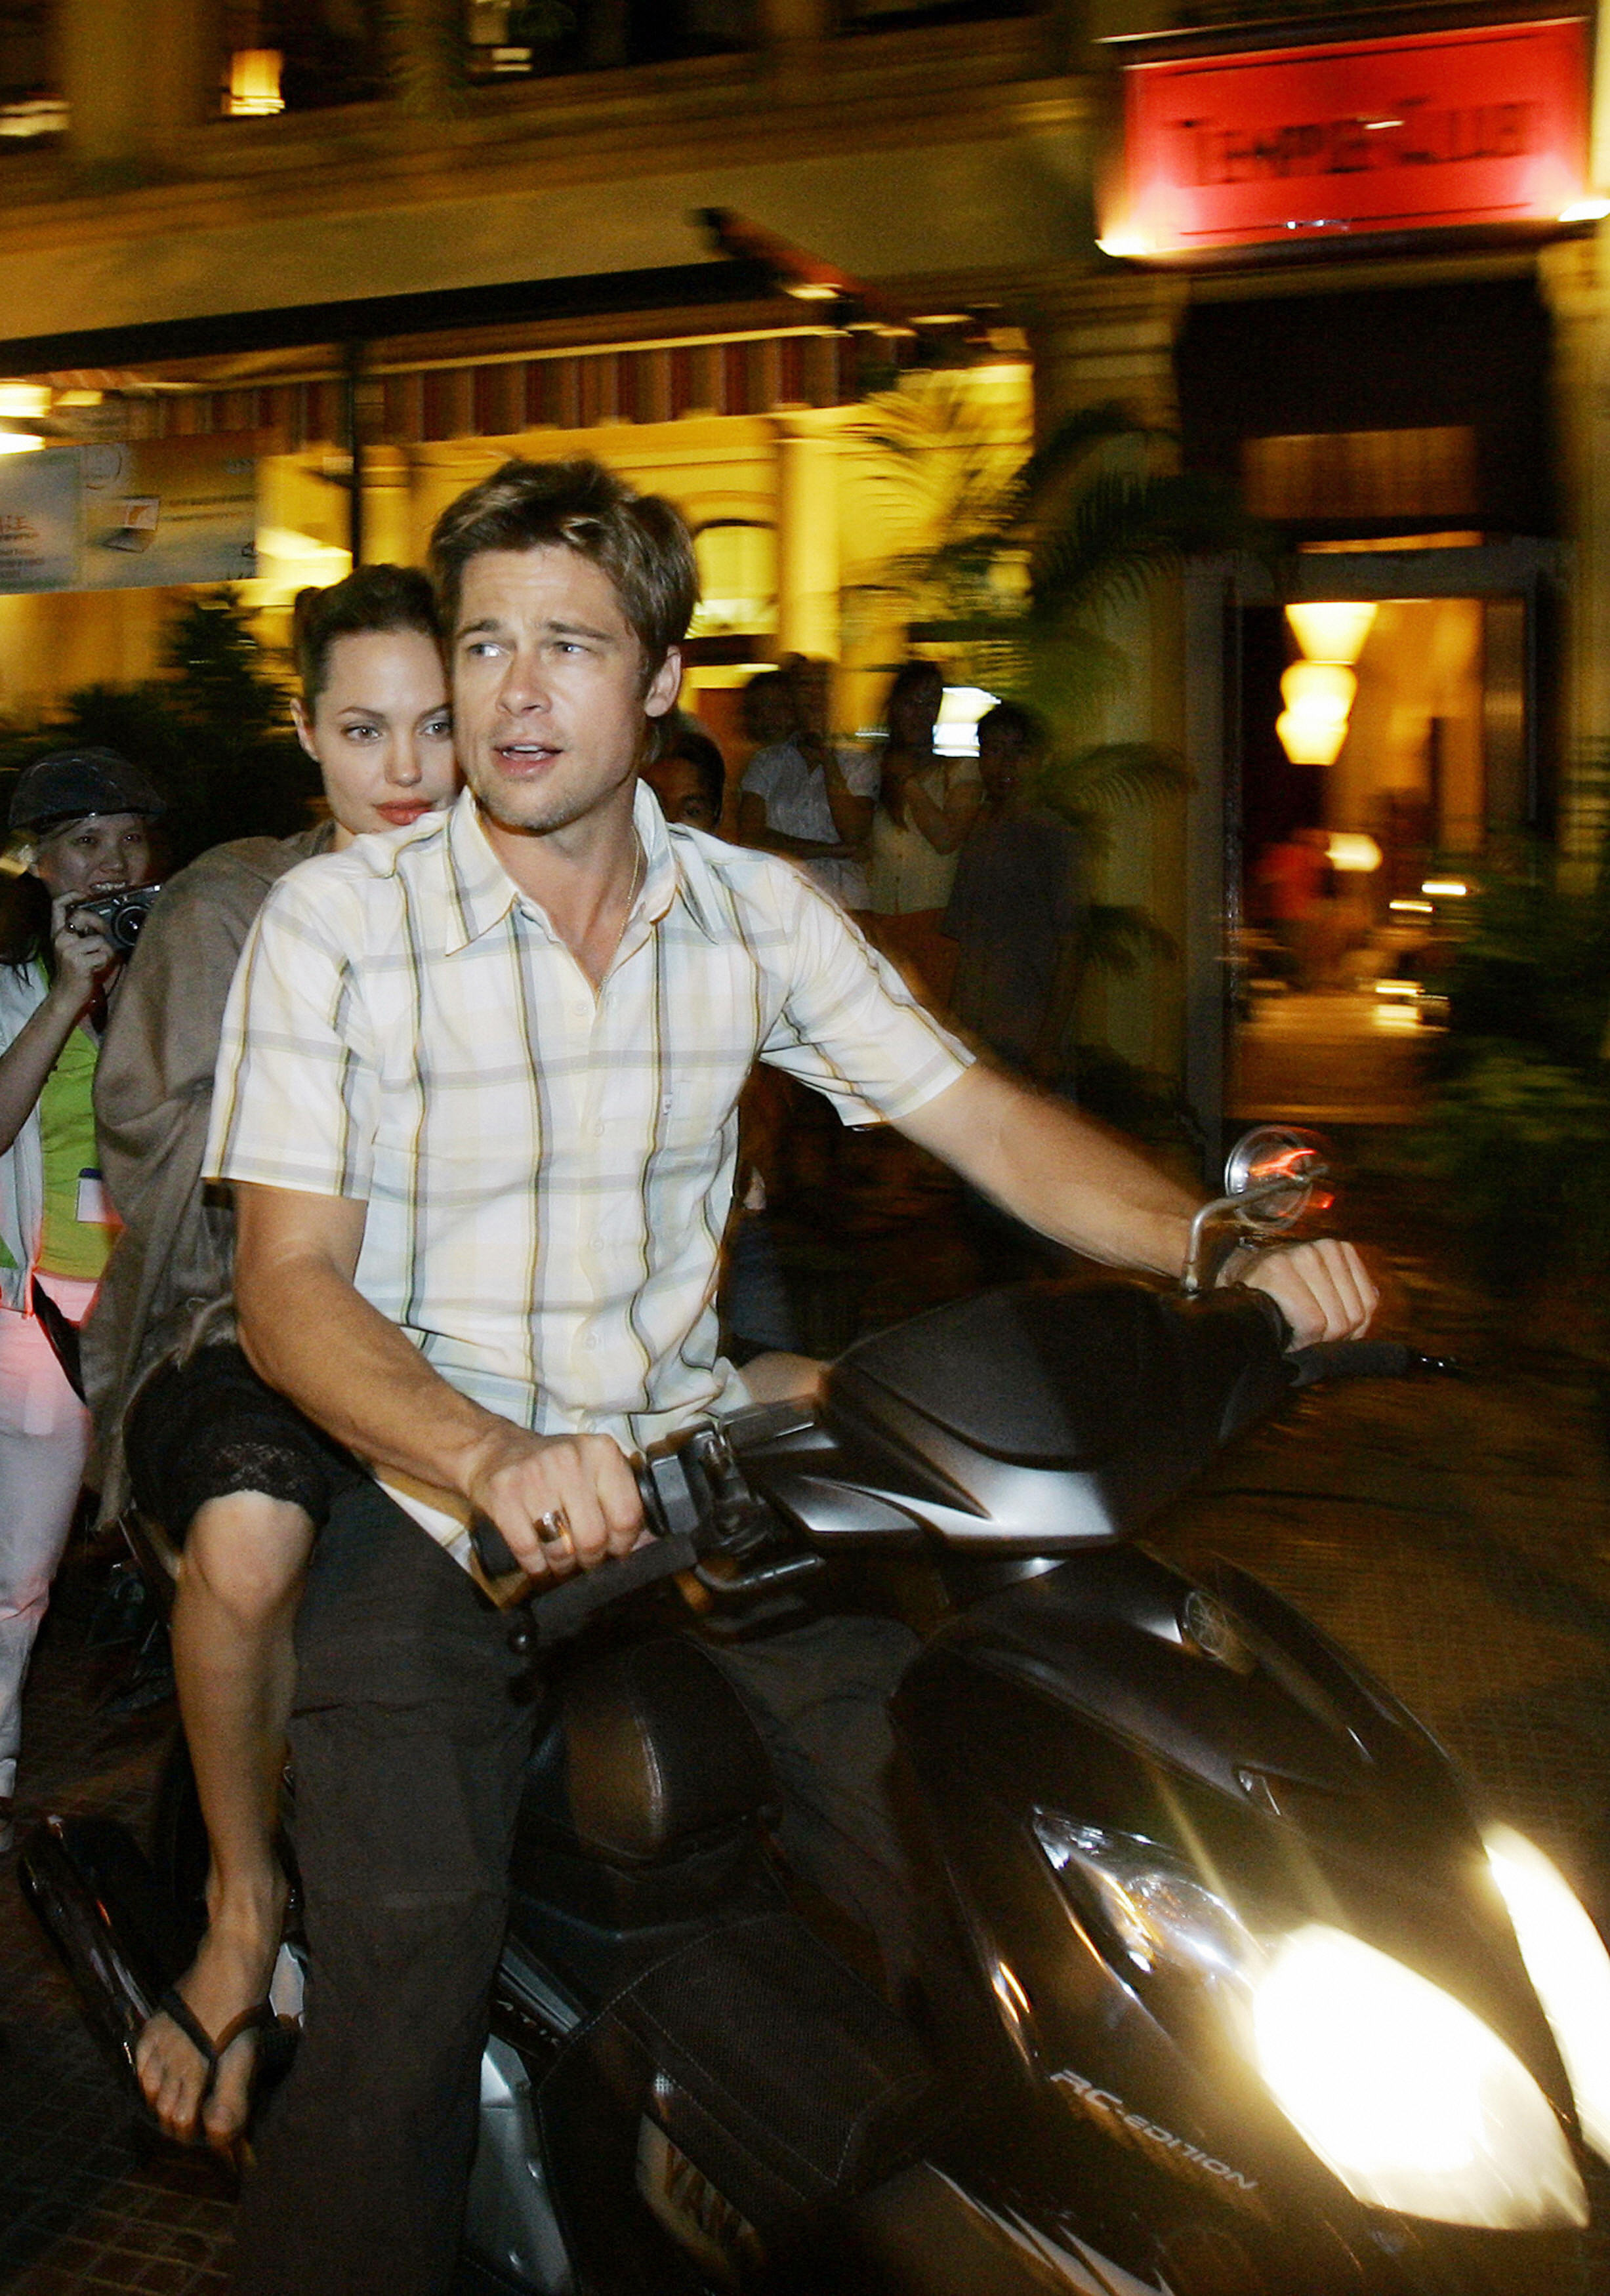 Ho Chi Minh City, VIET NAM: Hollywood stars Brad Pitt and his partner Angelina Jolie leave the Temple Club restaurant where they had dinner in downtown Ho Chi Minh city, late 23 November 2006. The two stars make a discret stay in Vietnamese Southern economic hub after a surprise visit to Cambodia where Jolie pledged to set up a new conservation project. Jolie and Pitt flew to Southeast Asian countries during filming for "A Mighty Heart" in Mumbai. AFP PHOTO (Photo credit should read STR/AFP/Getty Images)